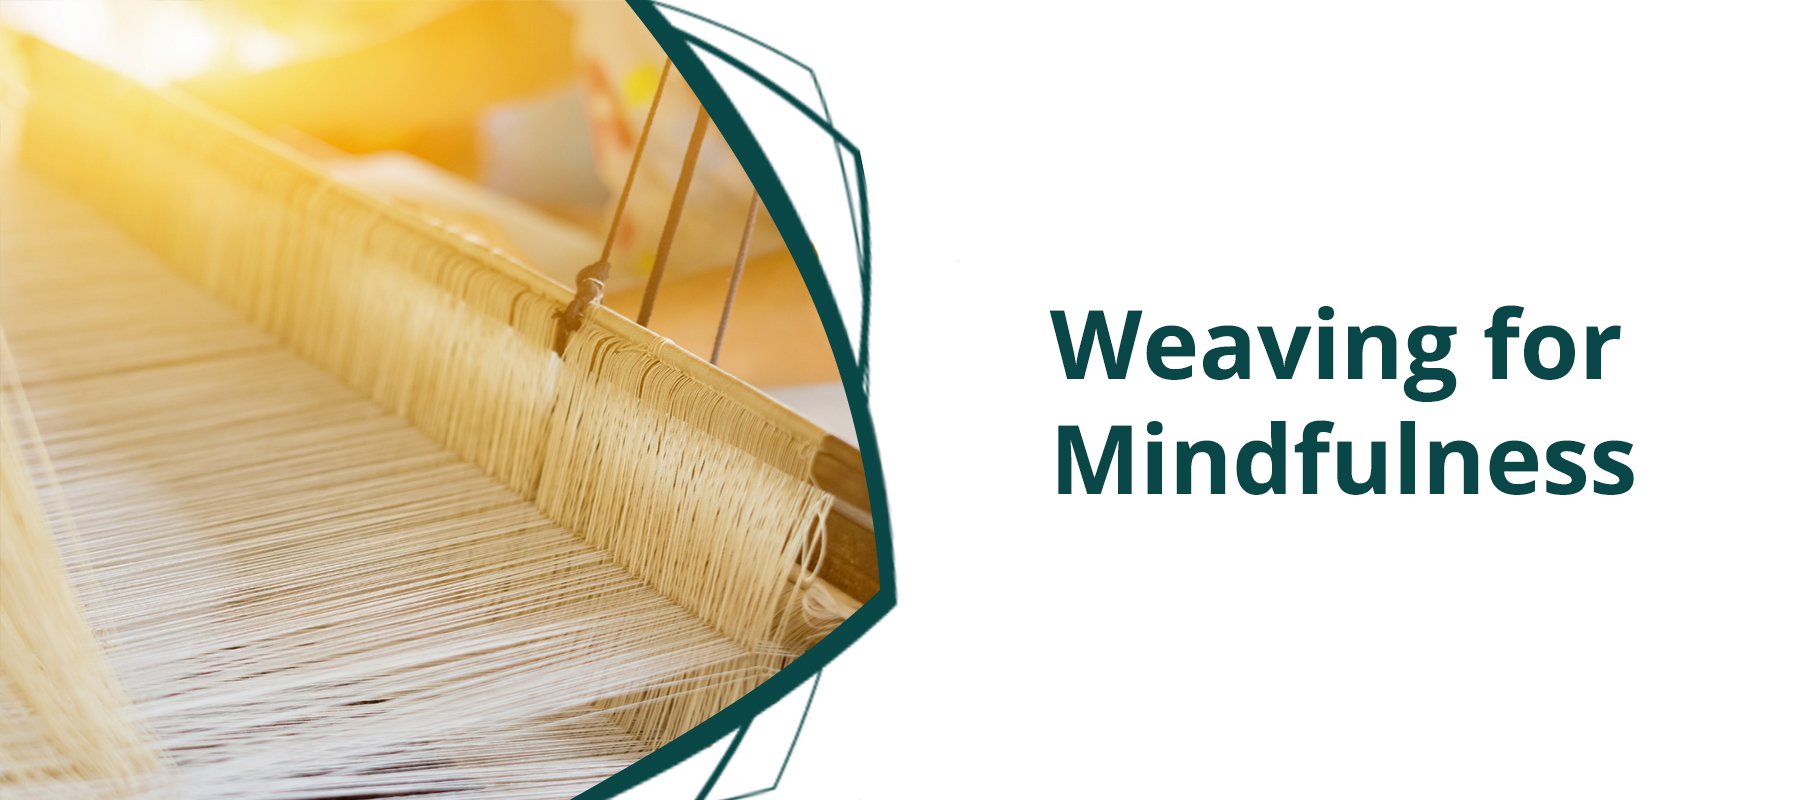 Weaving for Mindfulness: The Therapeutic Benefits of Fibre Arts